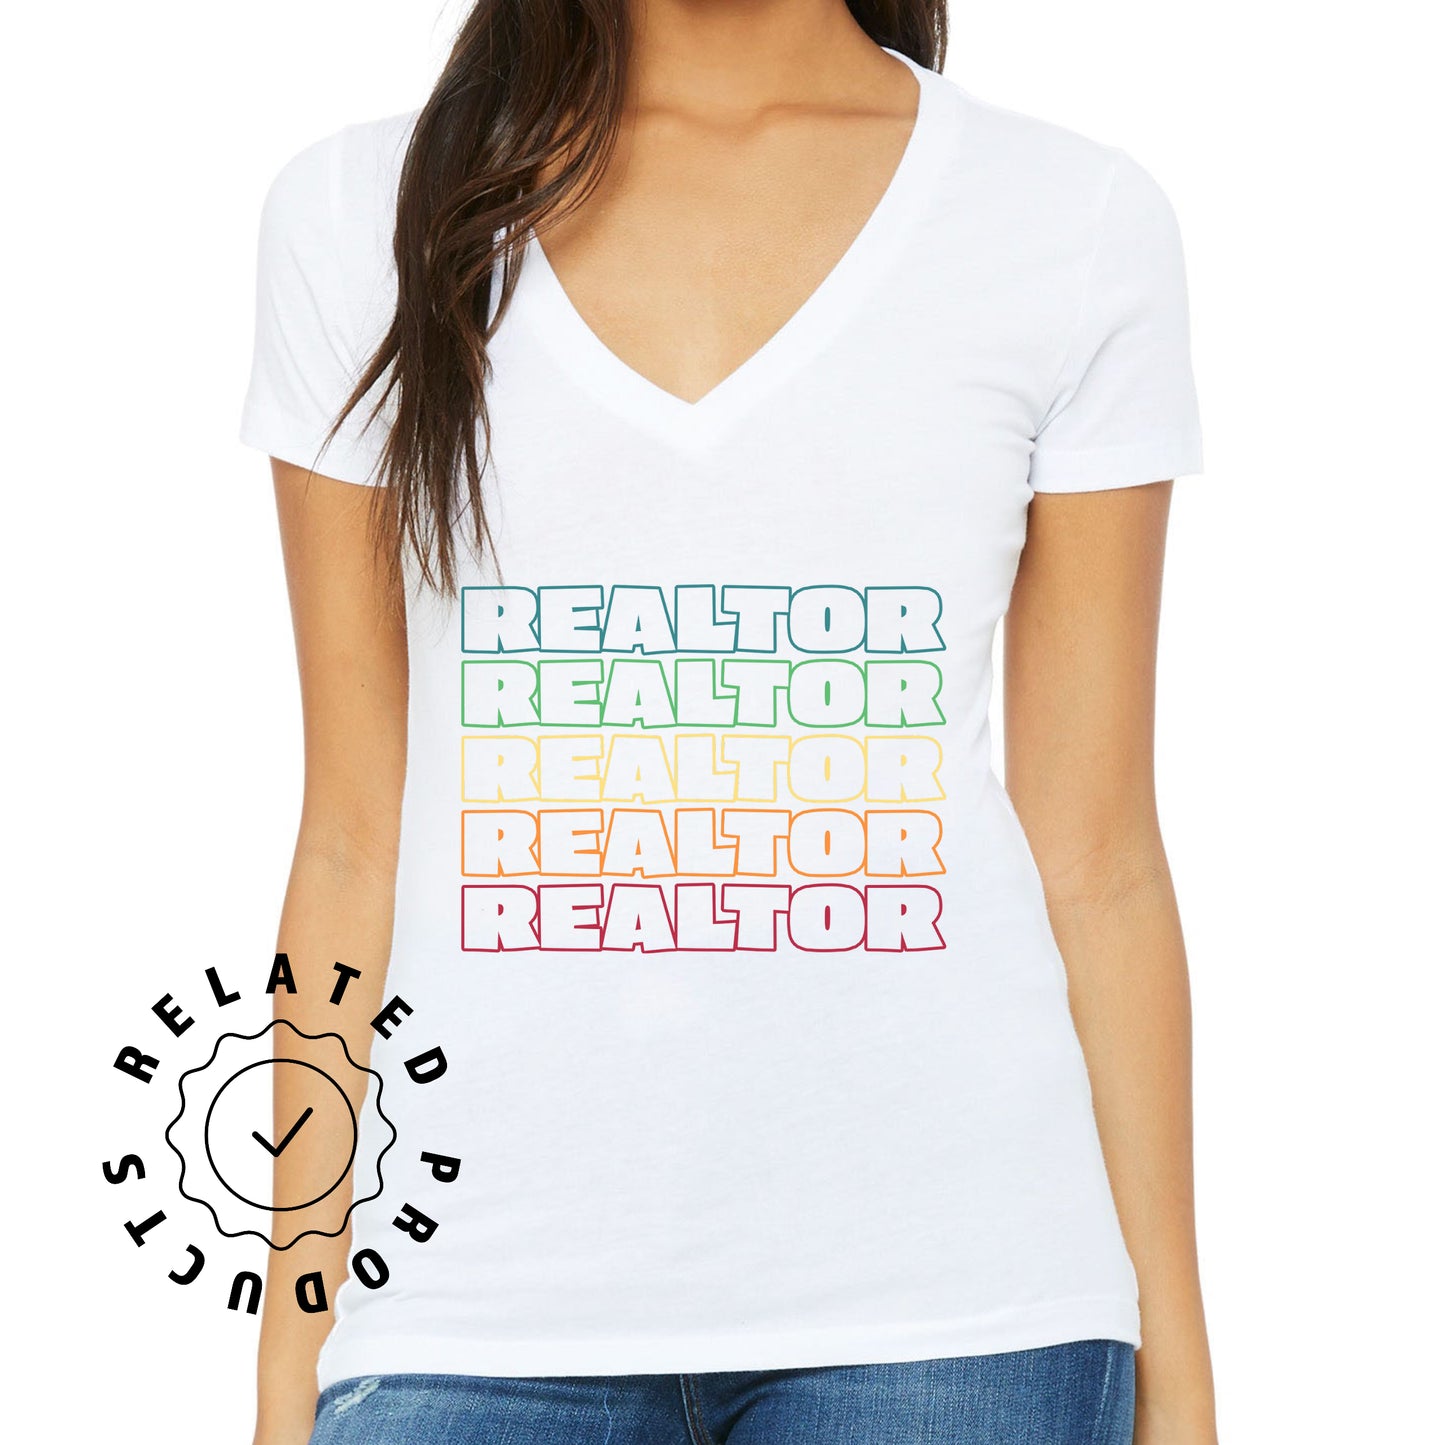 Realtor Tank Top For Real Estate Agent Tank Top For Realty Shirt For Gift For Realtor Cute Real Estate Tank Top For Real Estate Agent Gift